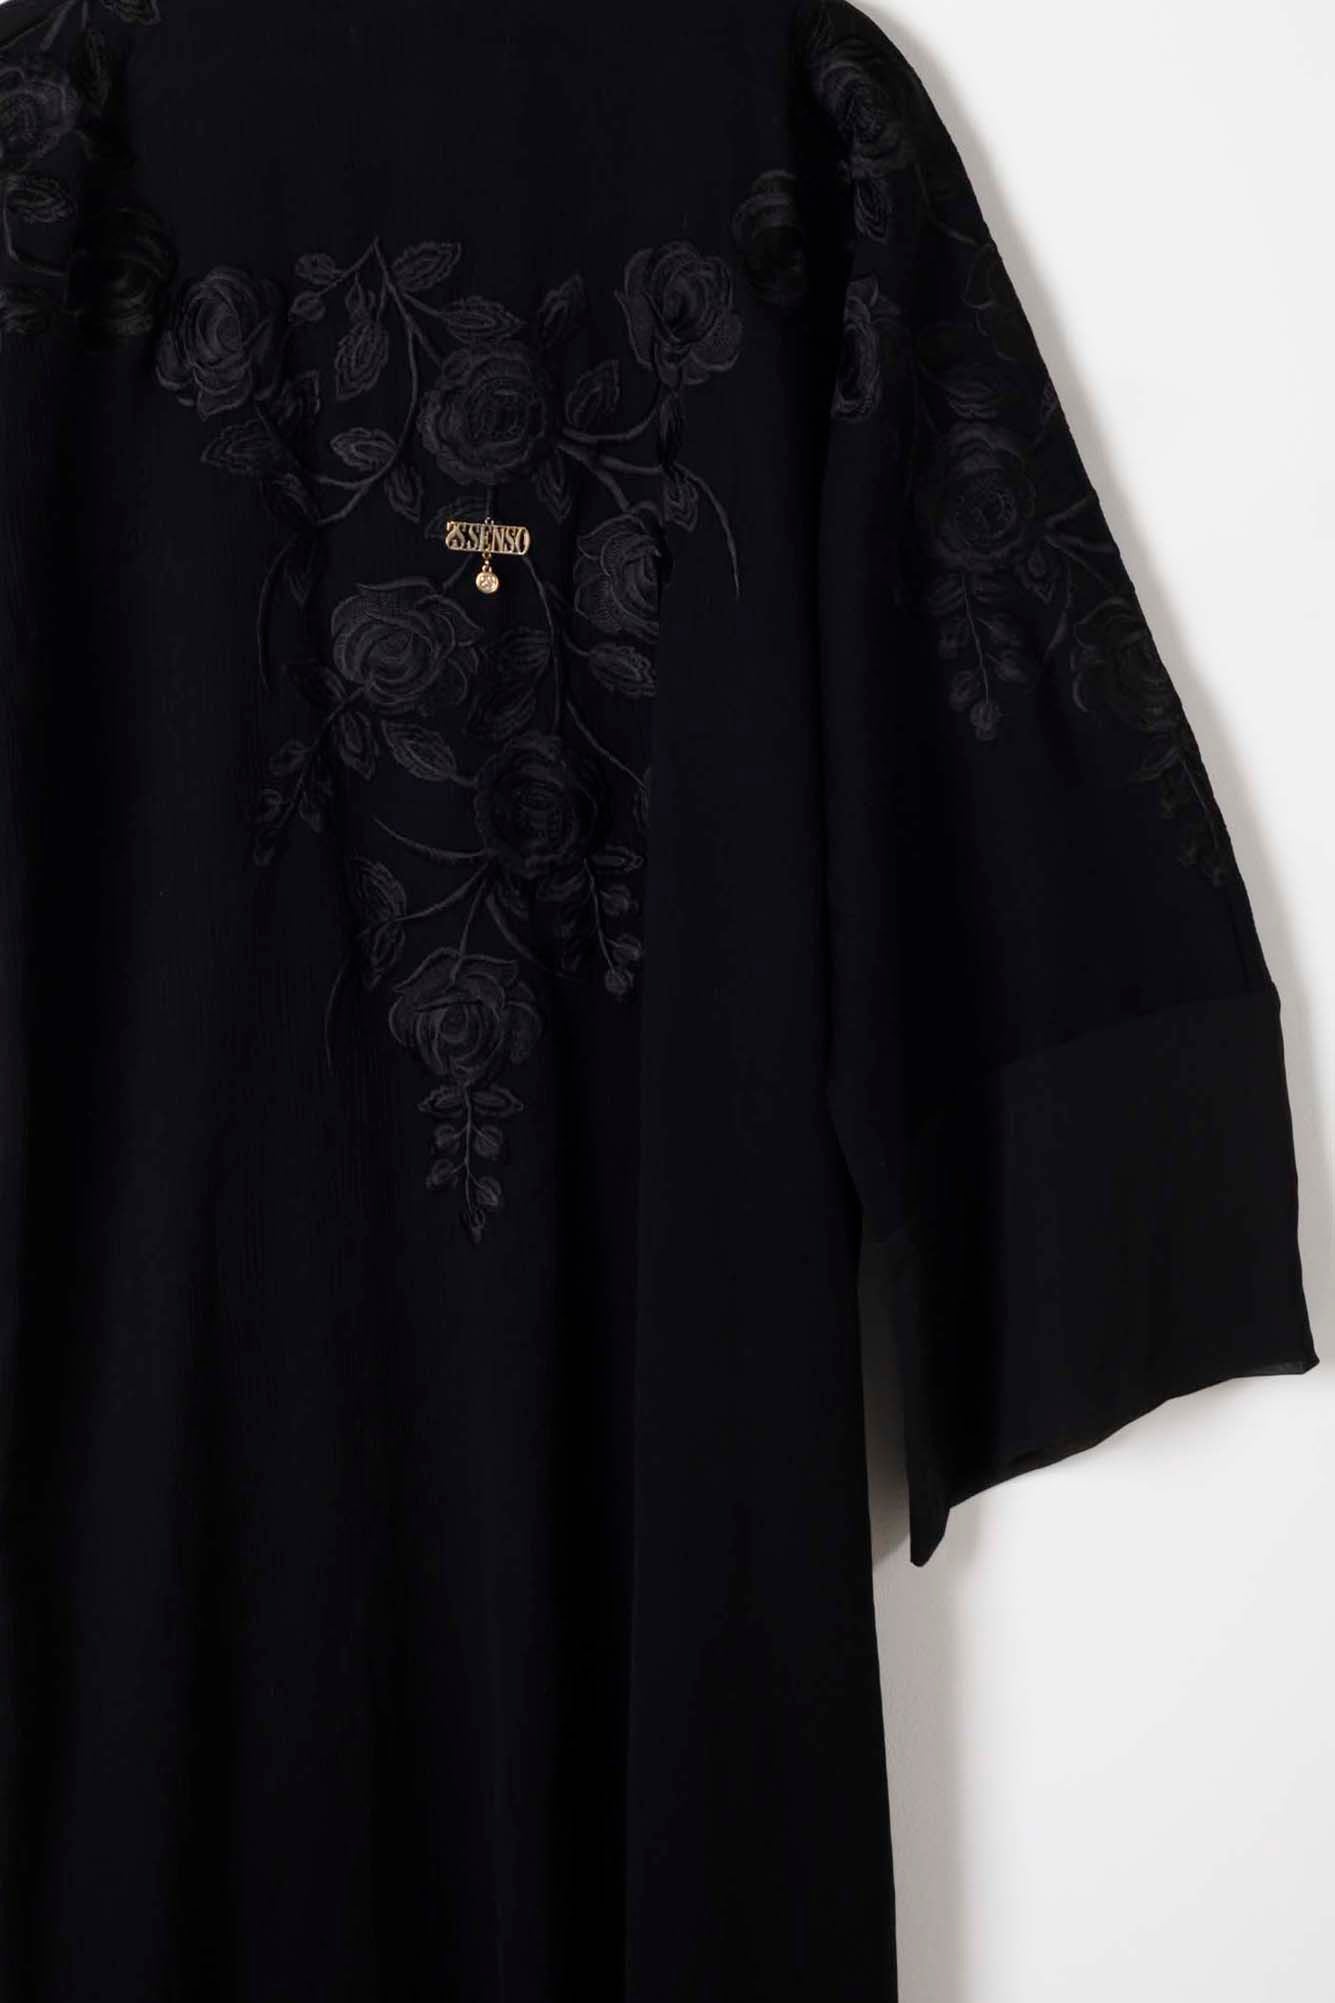 Black Abaya with Black Floral Embroidery